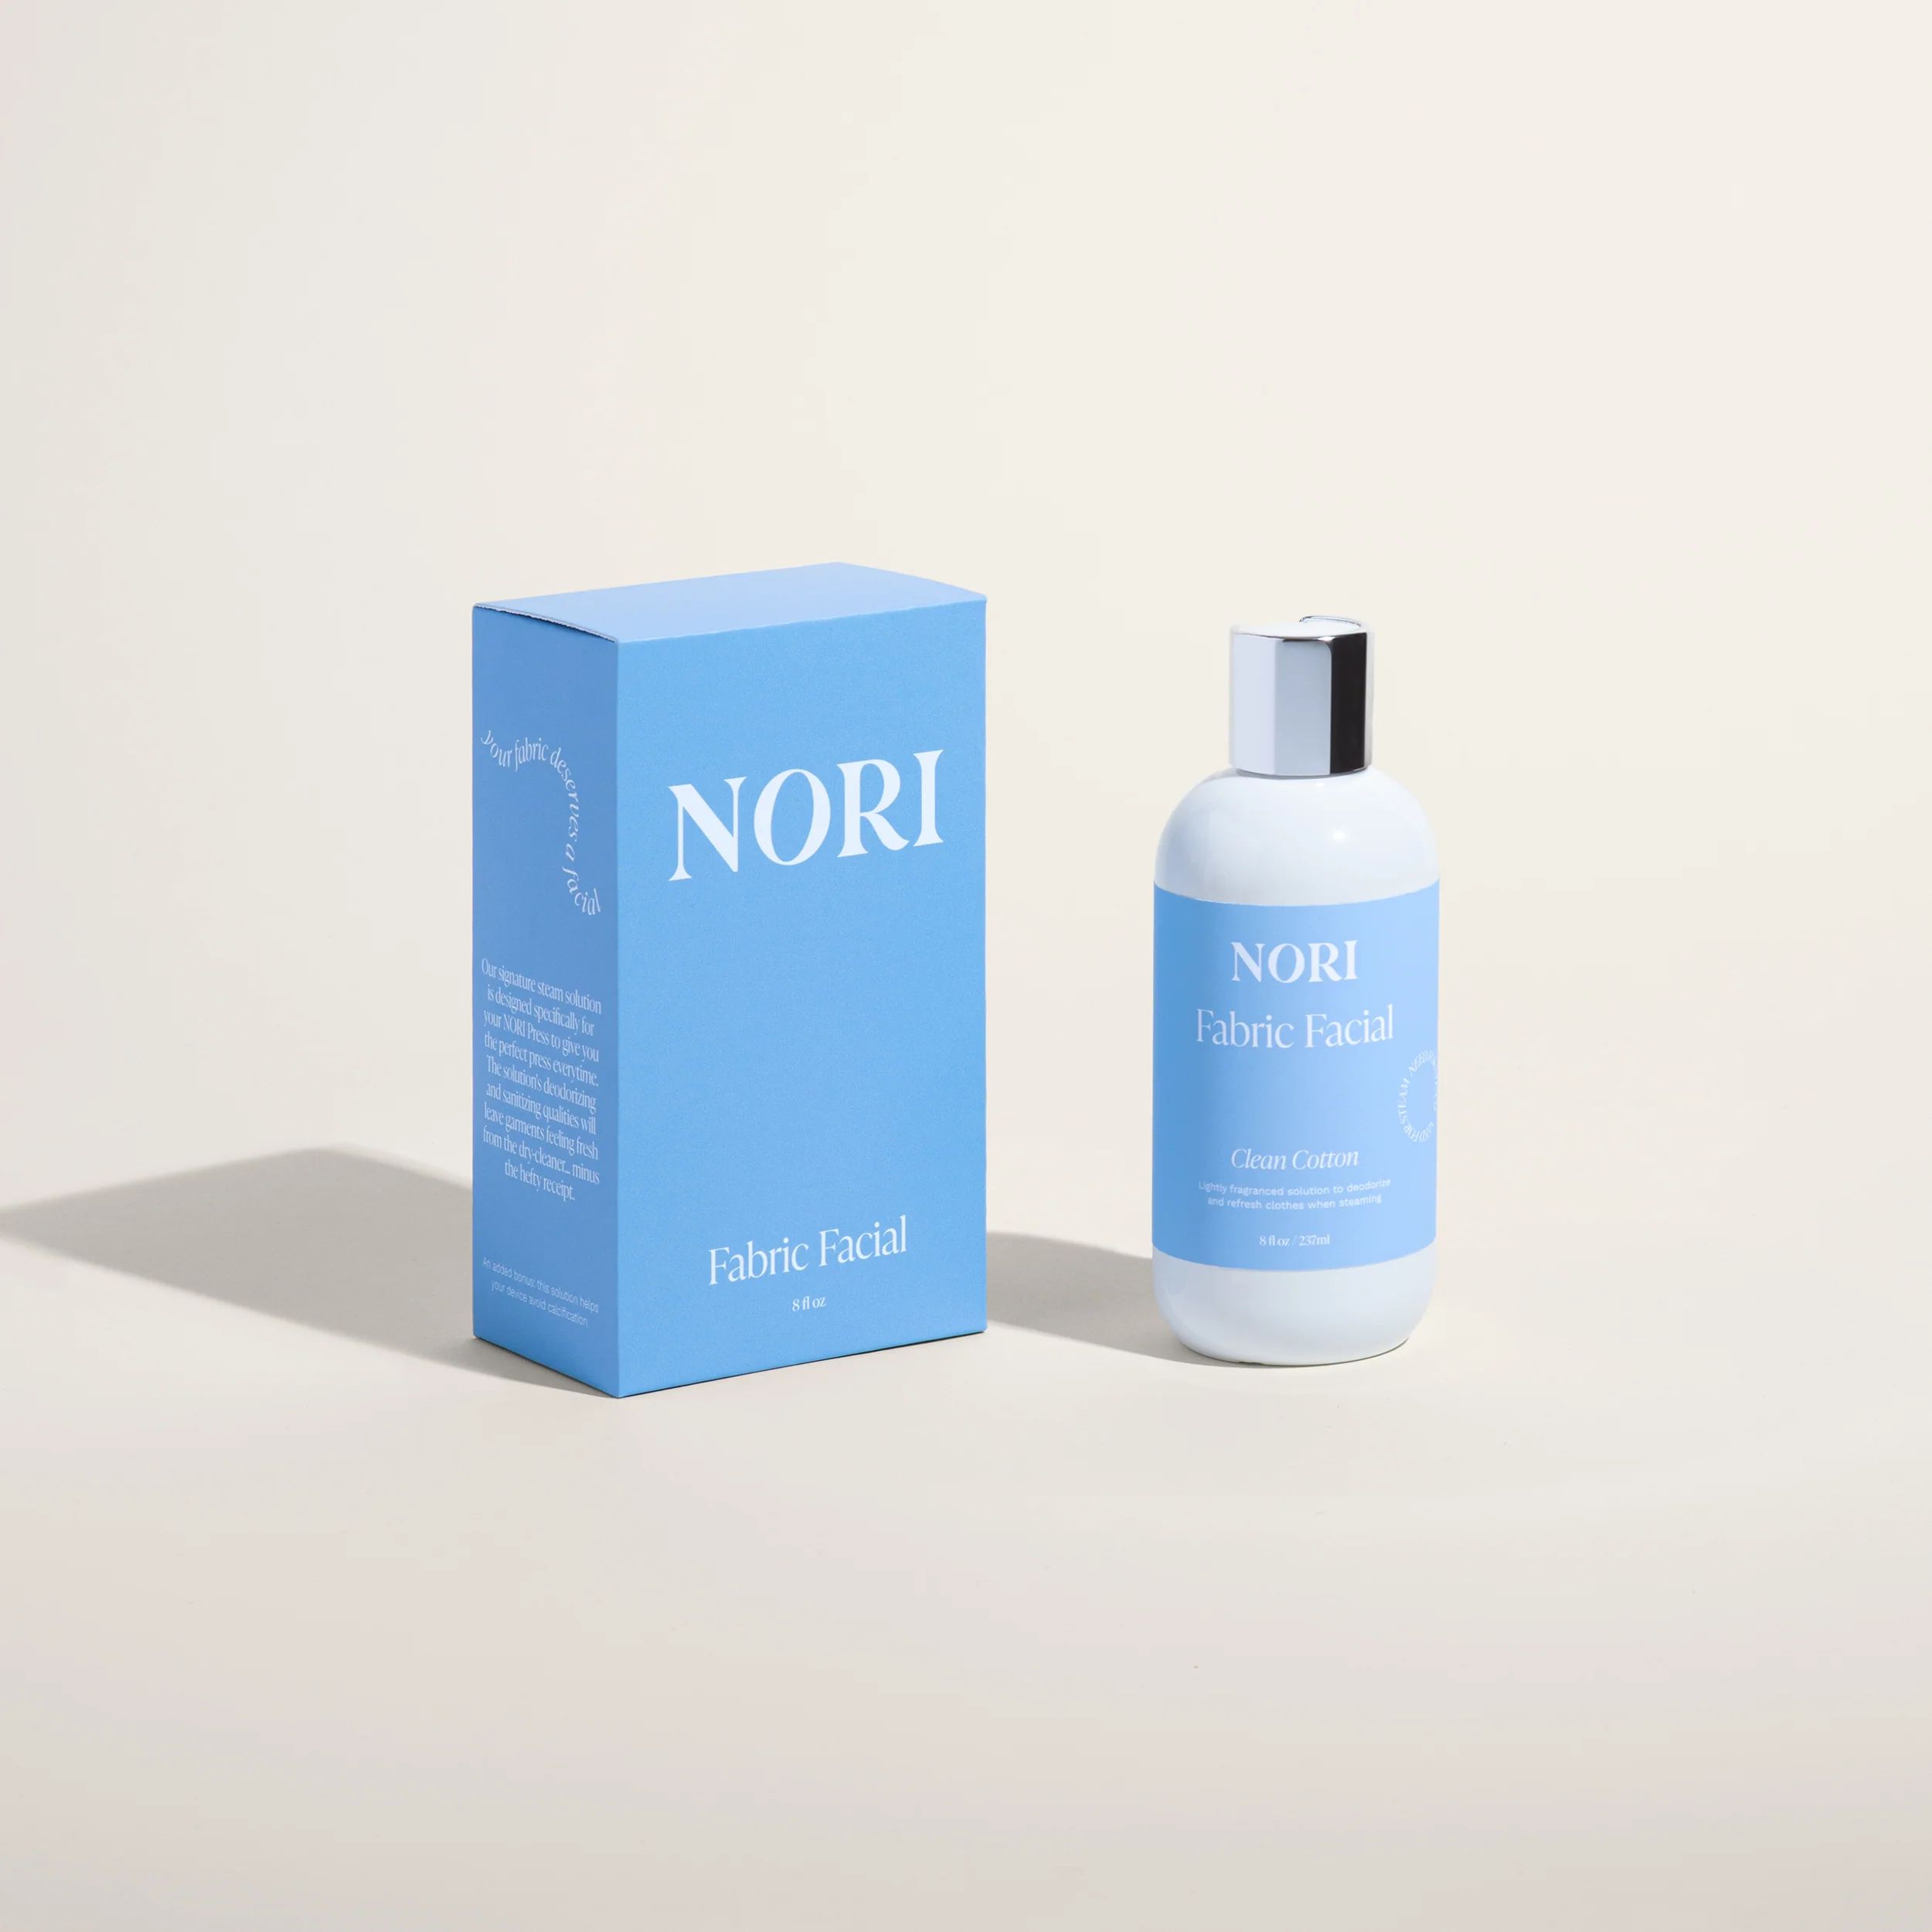 The Nori Fabric Facial - Best Ironing Water for Your Steam Iron | Nori